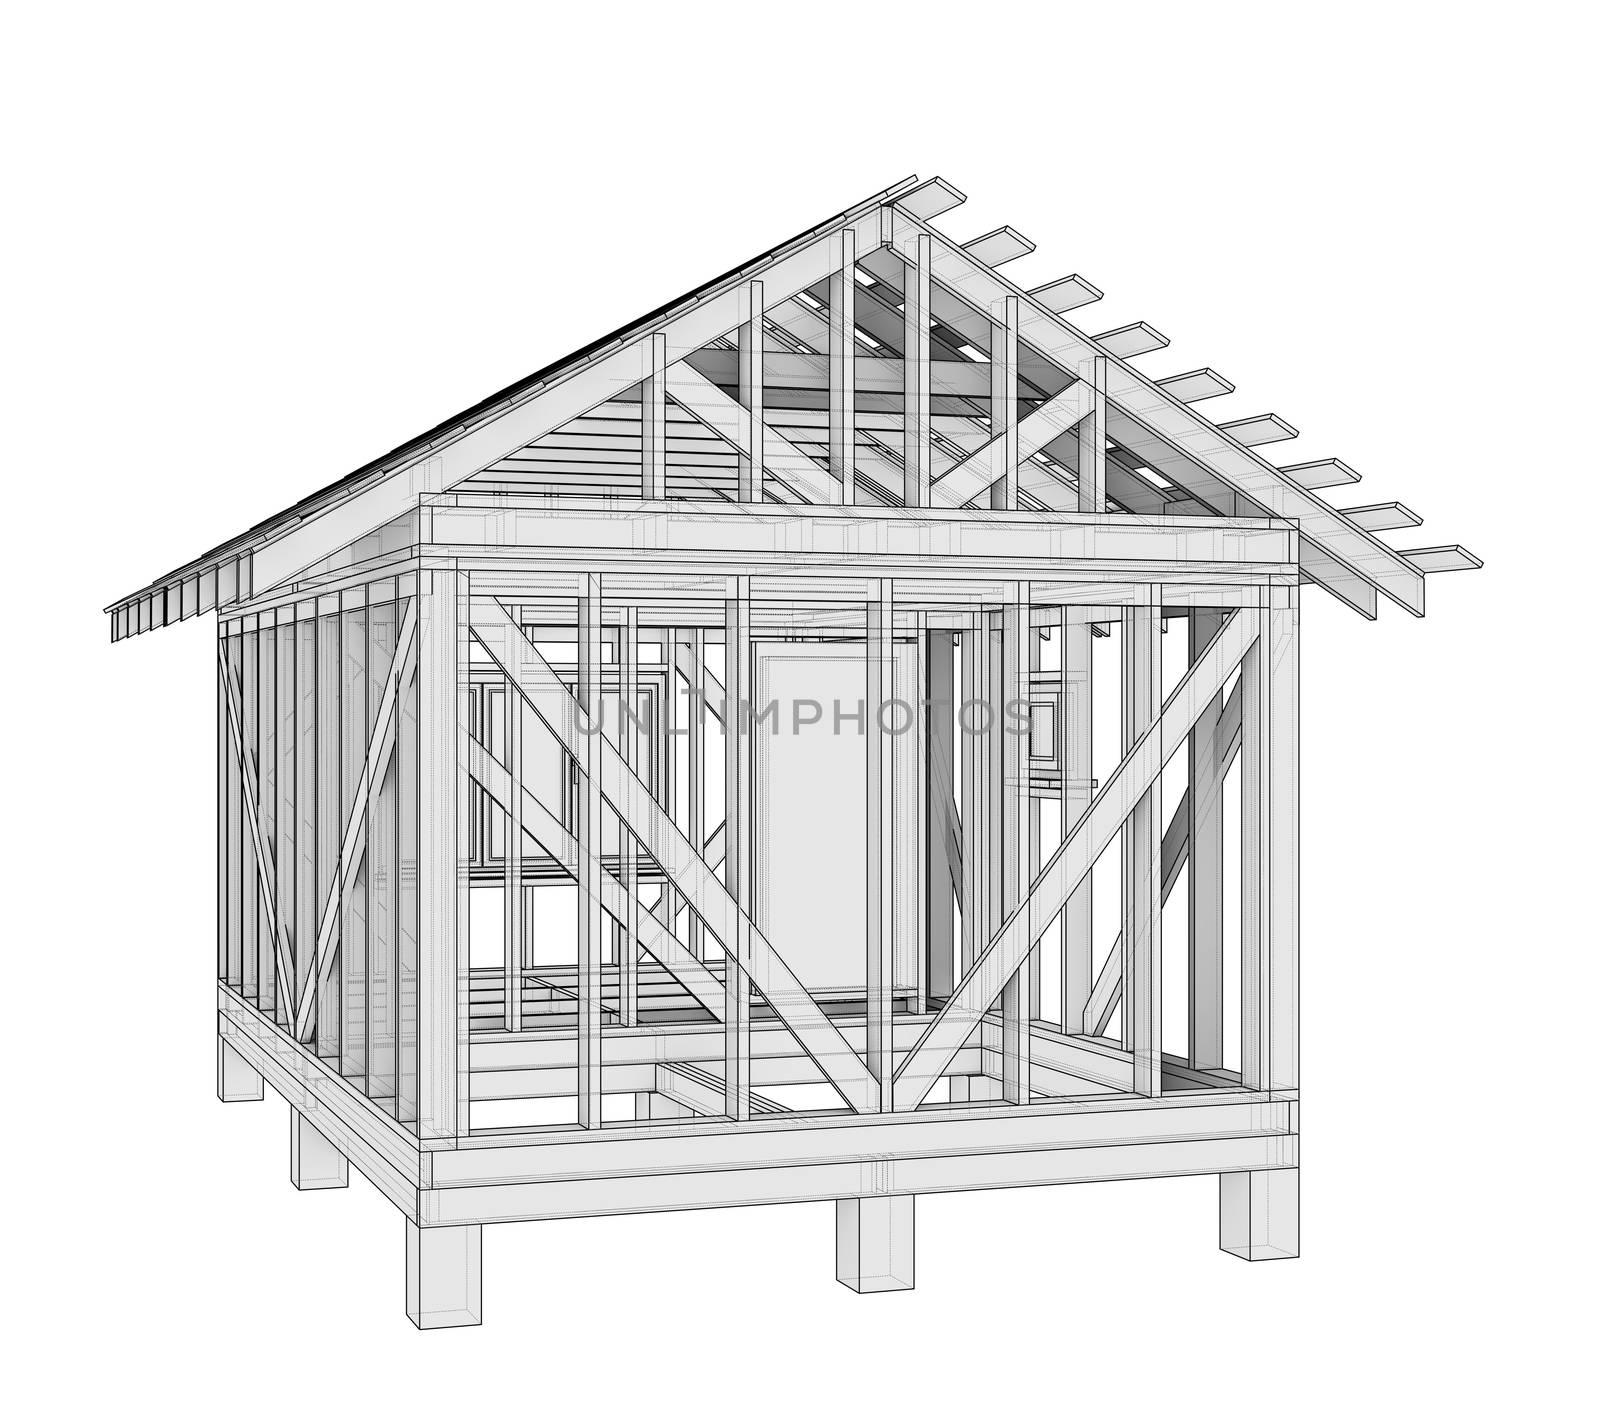 3D illustration of a small frame house by cherezoff